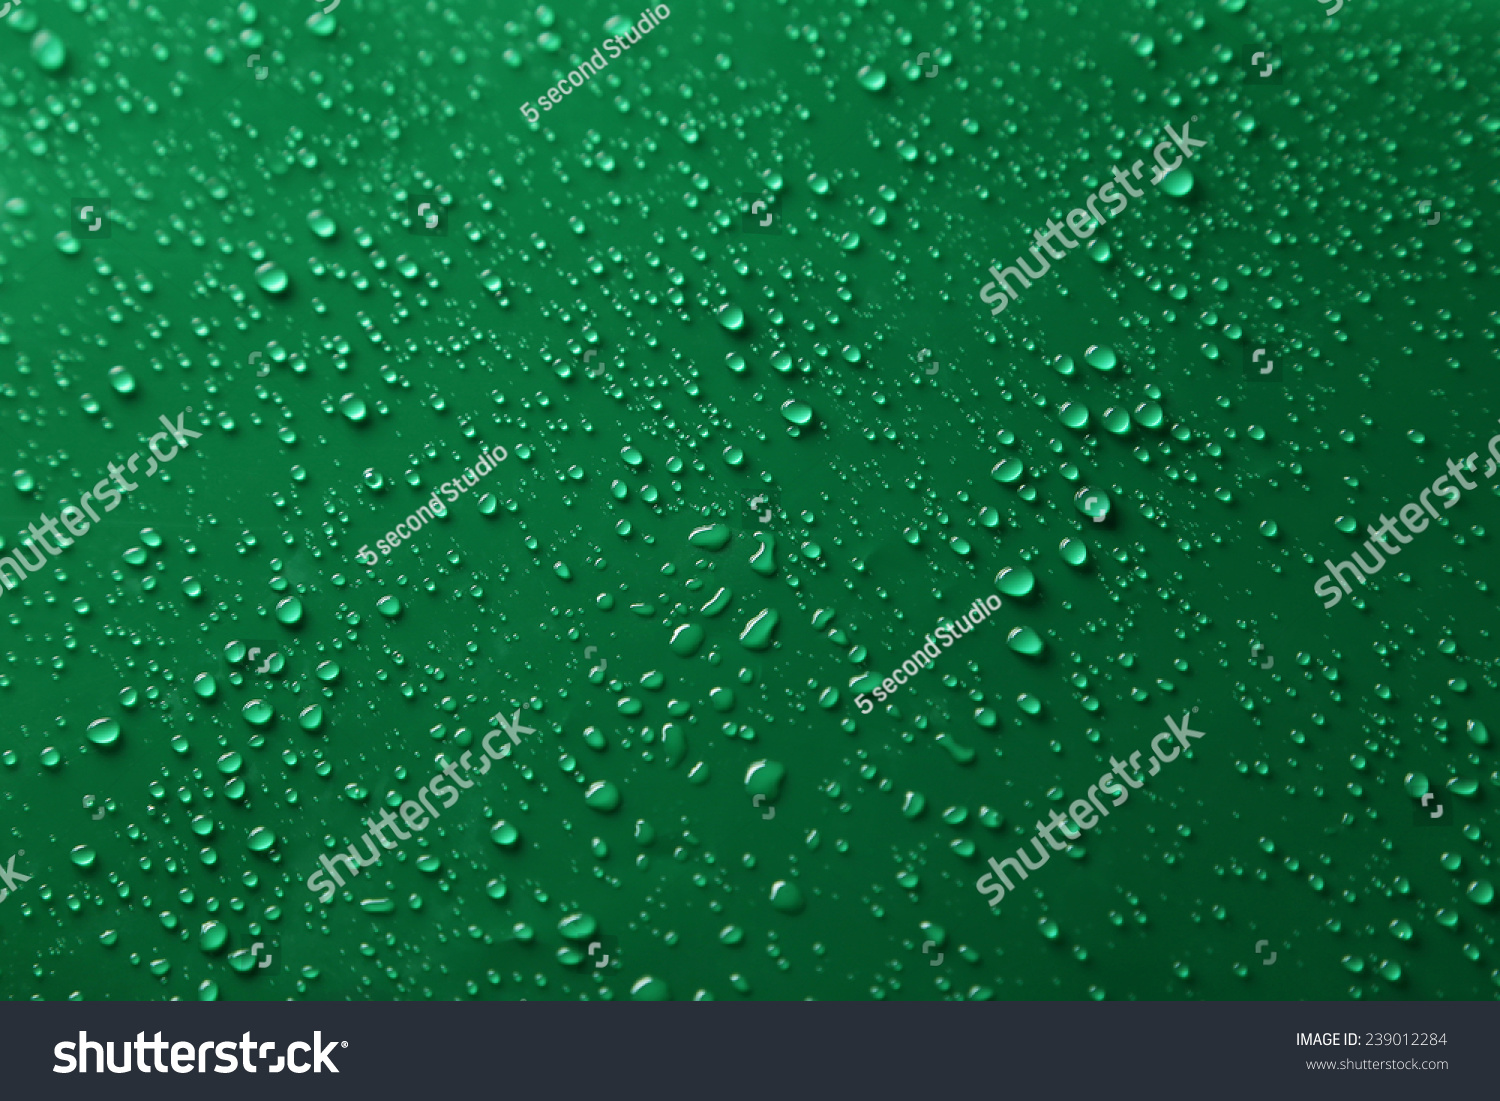 Water Drops On Green Background Stock Photo 239012284 : Shutterstock